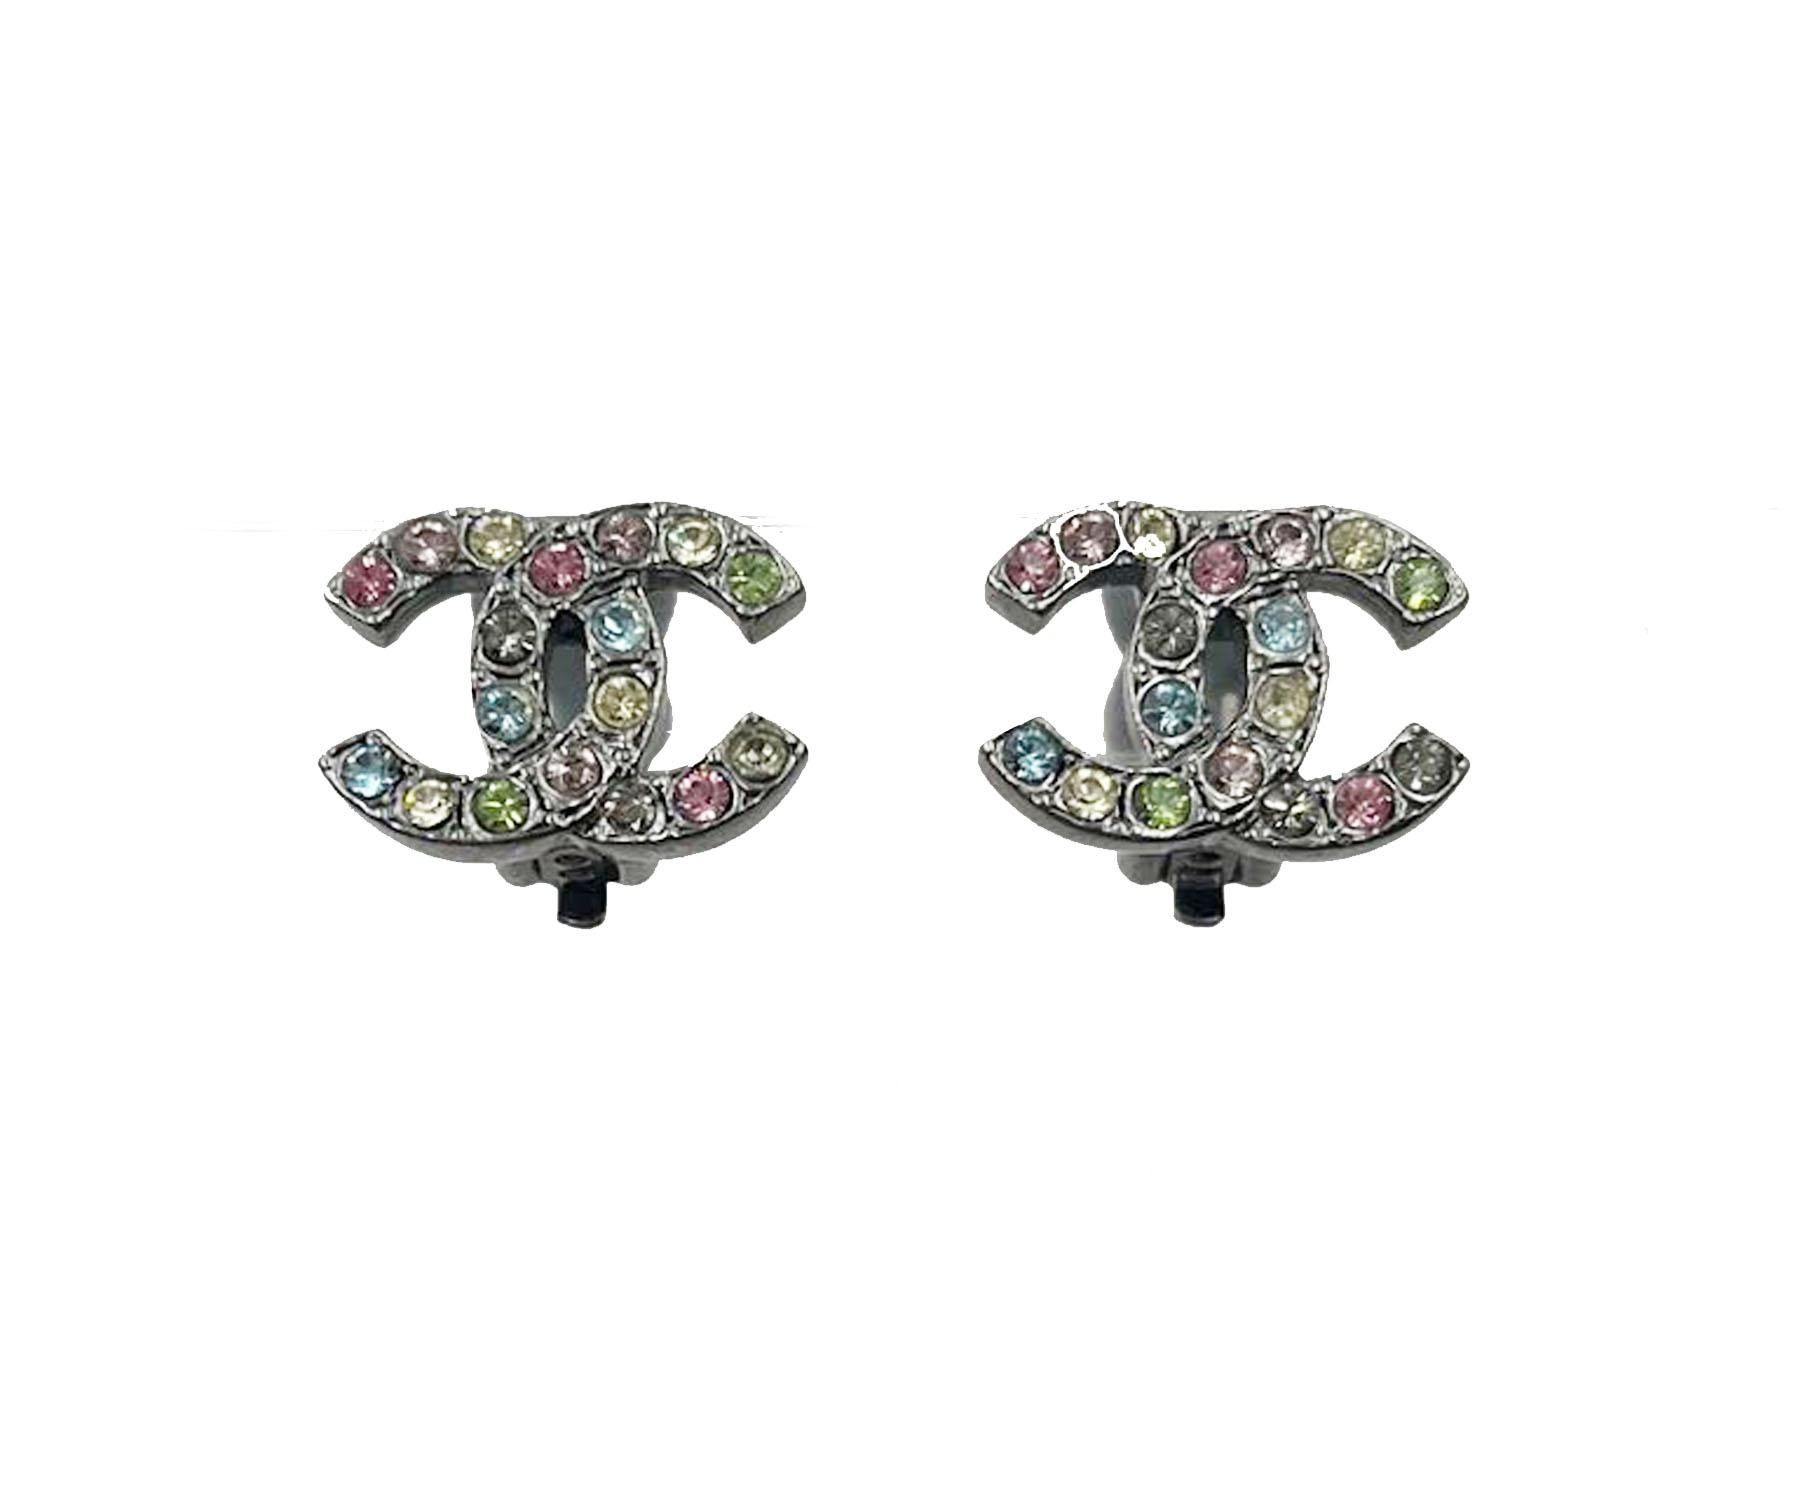 Chanel Silver CC Rainbow Crystals Clip on Earrings

*Marked 06
*Made in France
*Comes with the original dustbag

-It is approximately 0.75″ x 0.5″.
-This style comes with the small version. This pair is for the medium size.
-In an excellent